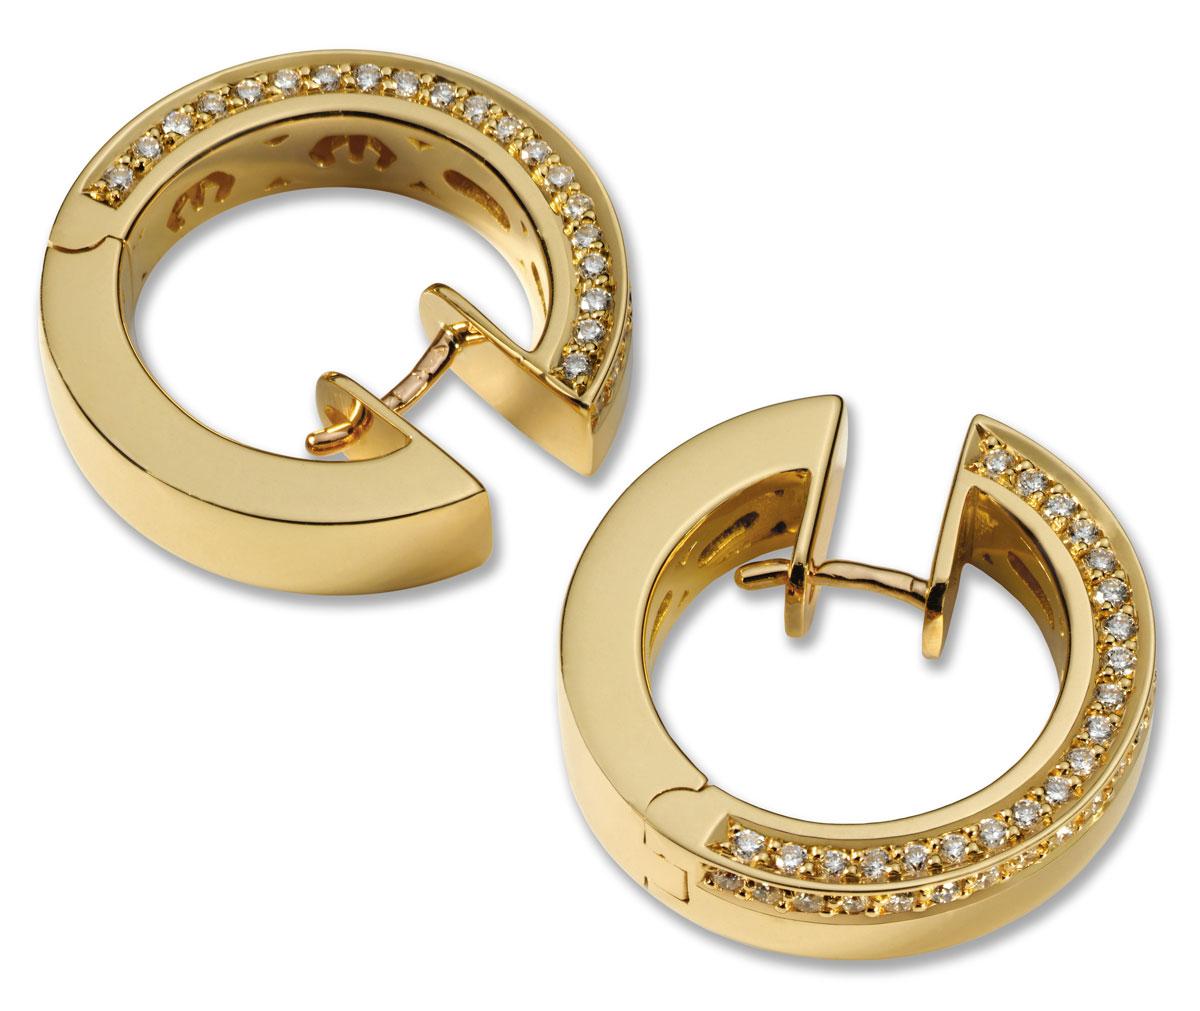 Seduction 19.2 Kt. yellow gold earrings crafted with 82 brilliant cut diamonds with 0.60 ct. from Cosmopolitan Collection.

About Cosmopolitan Collection from Monseo:
Cosmopolitan is a collection with versatile jewellery that can be combined in